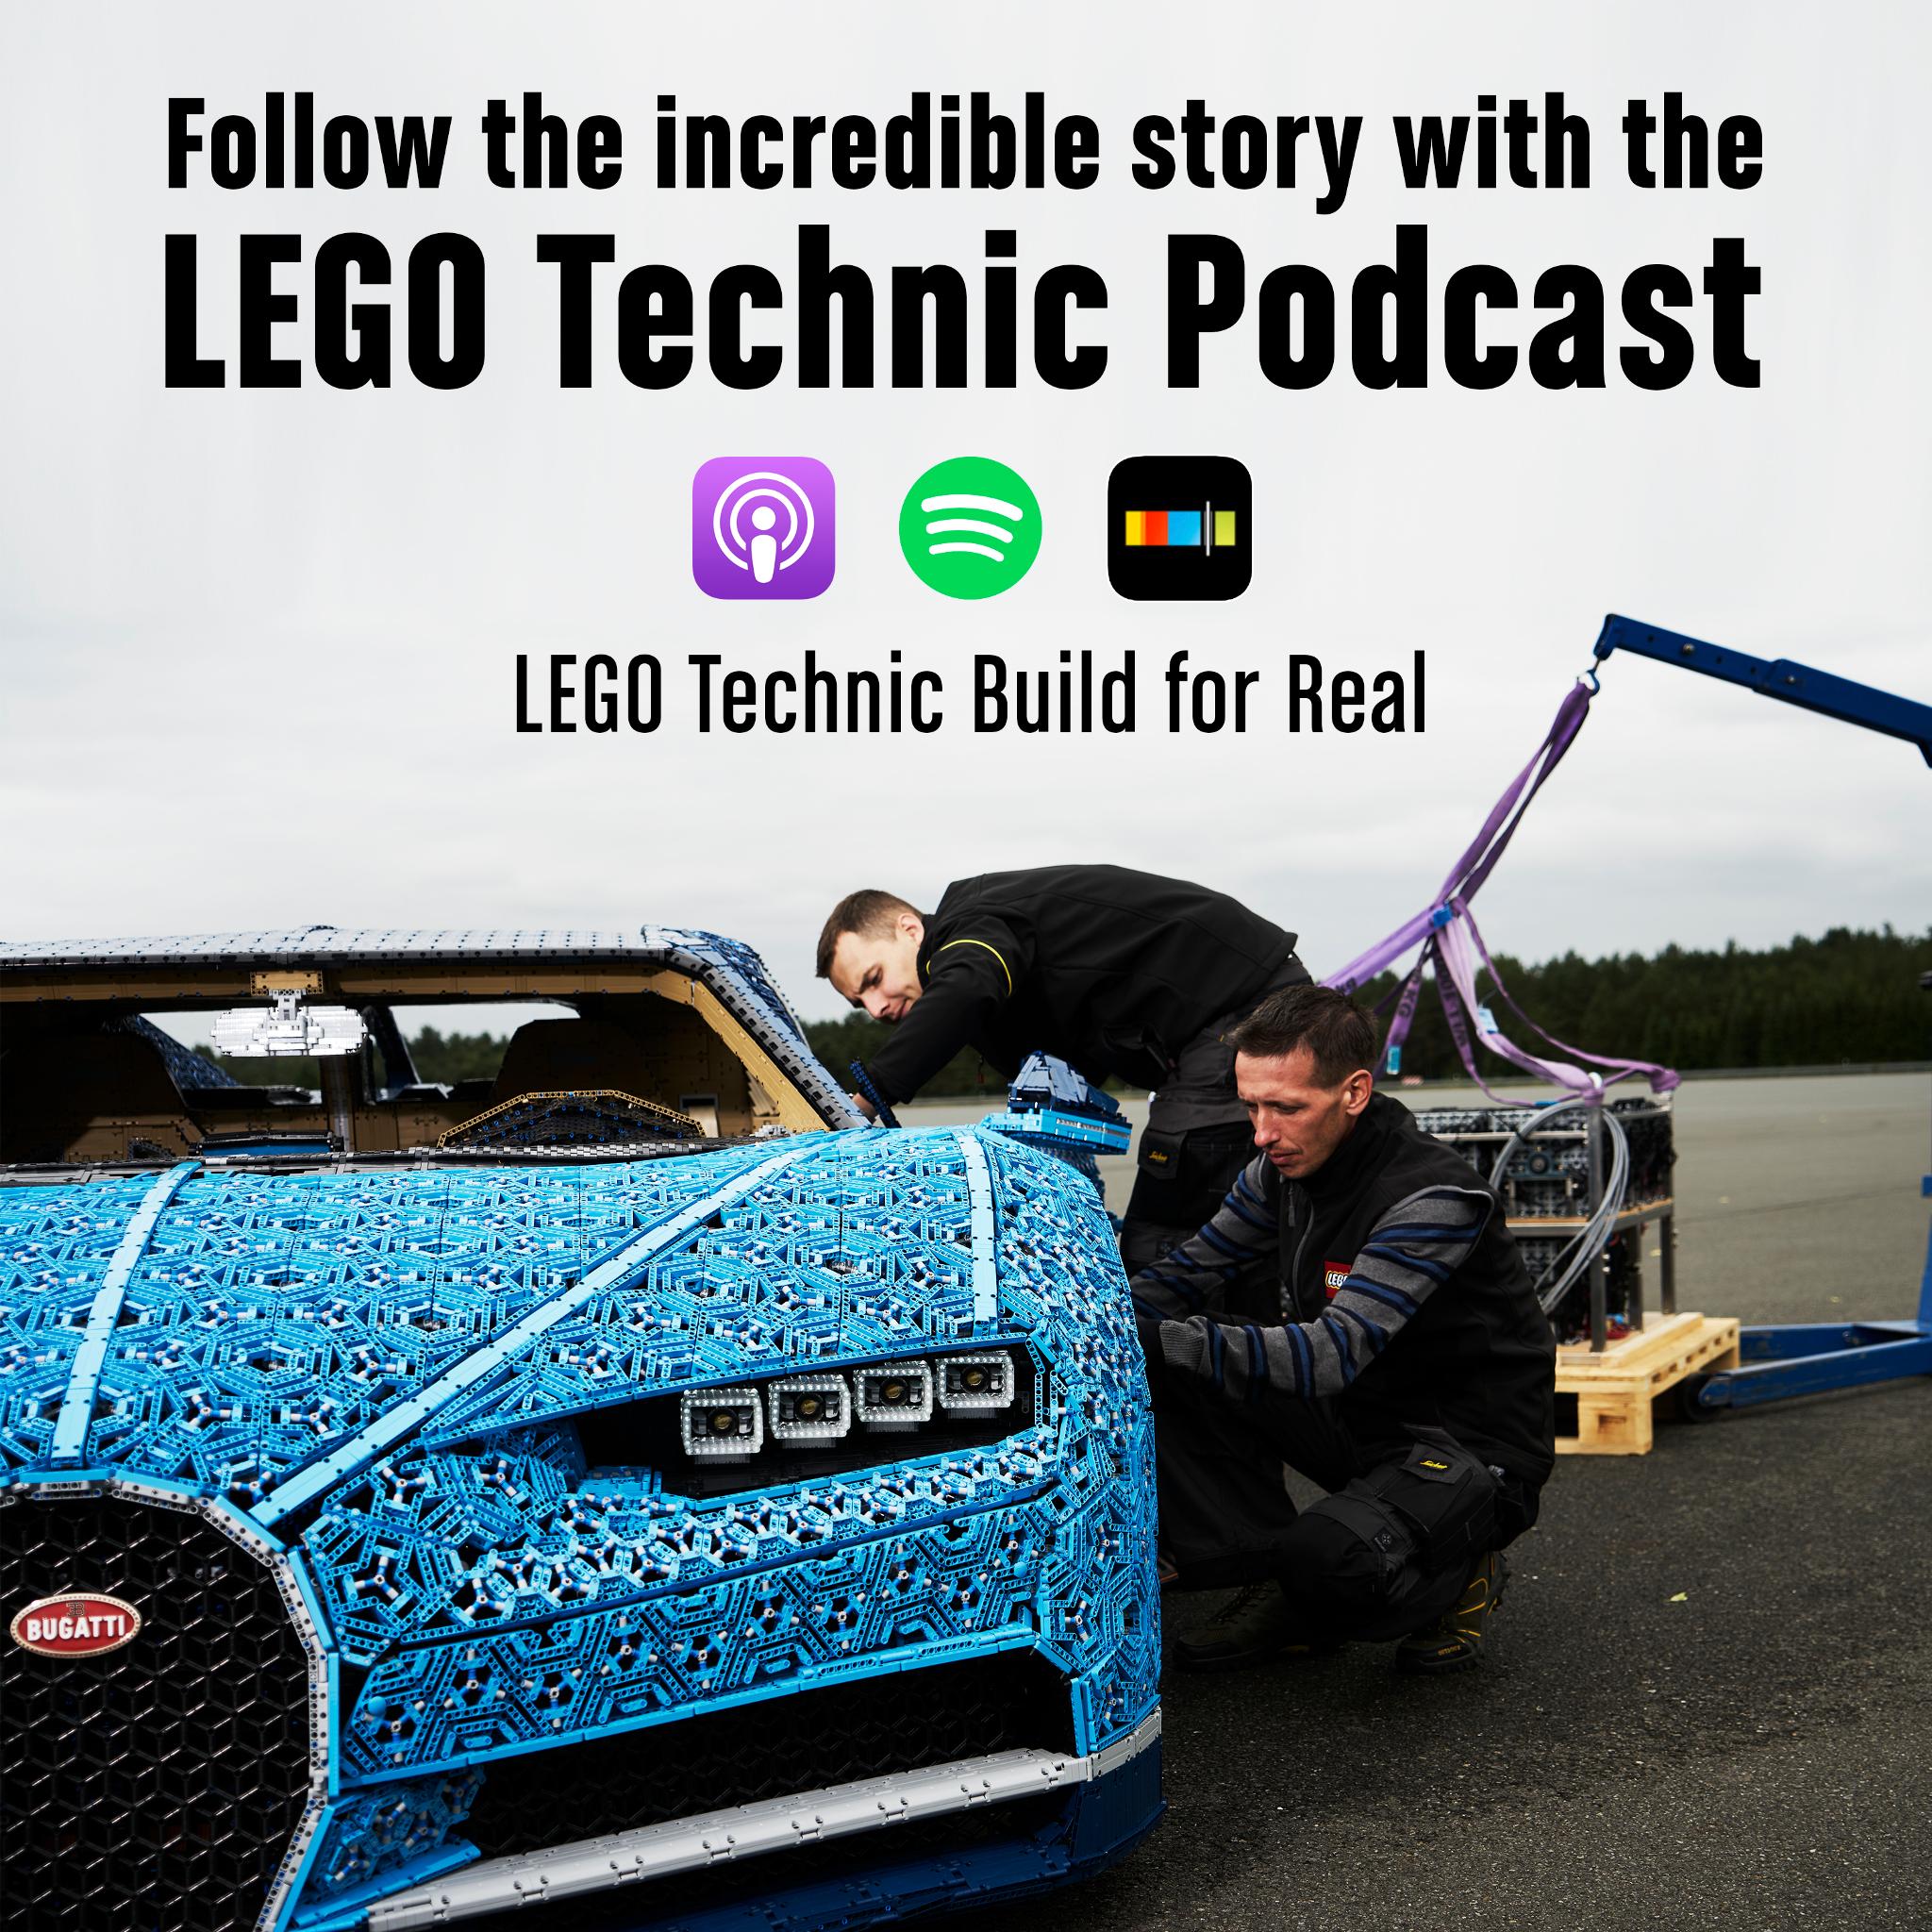 LEGO on Twitter: "Want to know the story behind our amazing life-size LEGO Technic Bugatti Chiron? Then go search for the LEGO® Technic Podcast… New episodes out https://t.co/uCaEUHsgWu" / Twitter